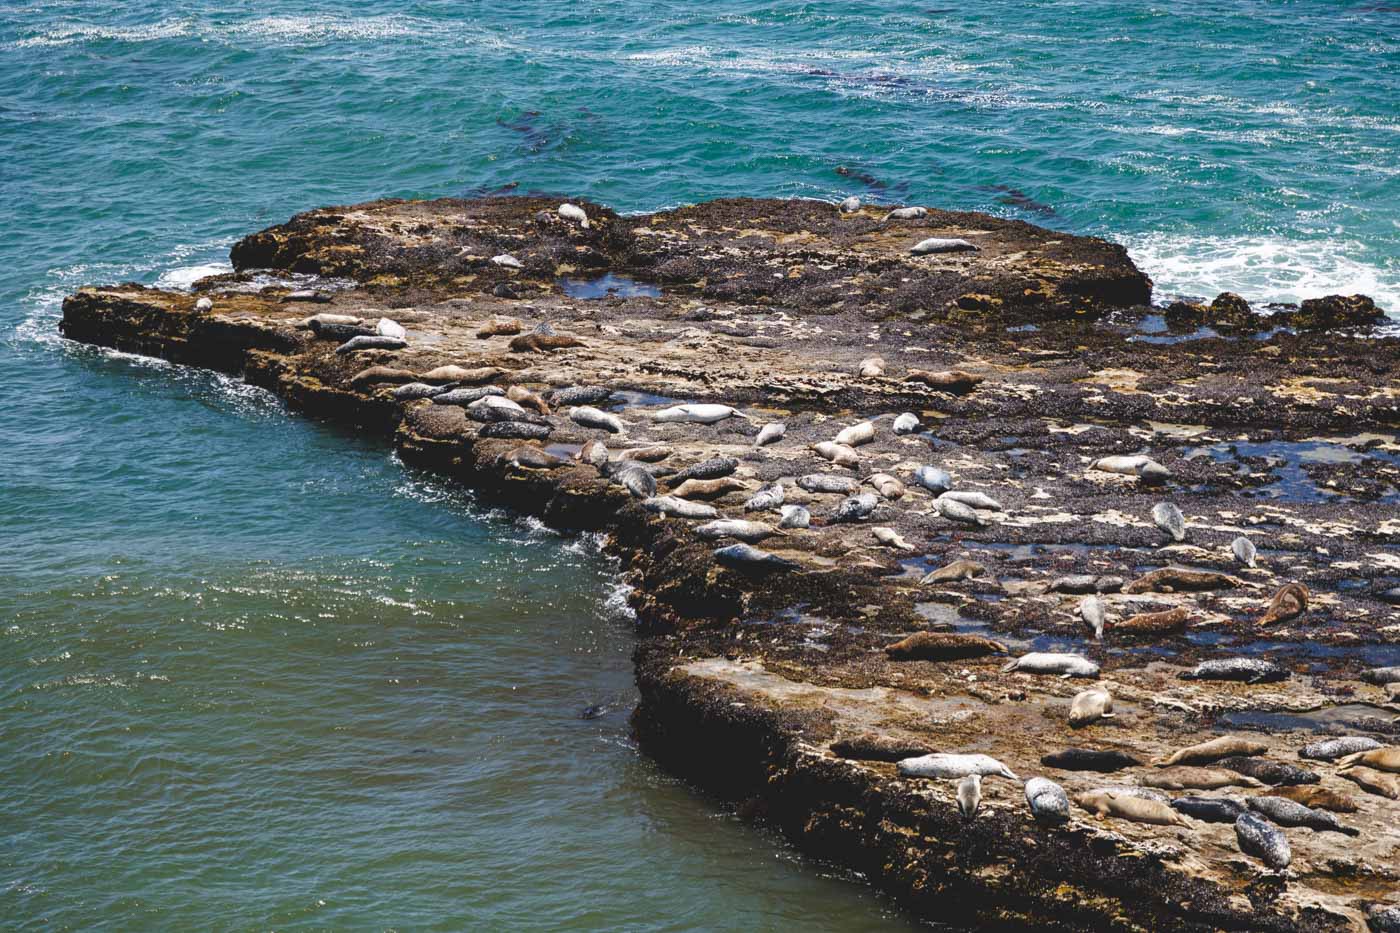 A sea lion colony sleeping on a rocky outcrop in the oceans of Wilder Ranch State Park.